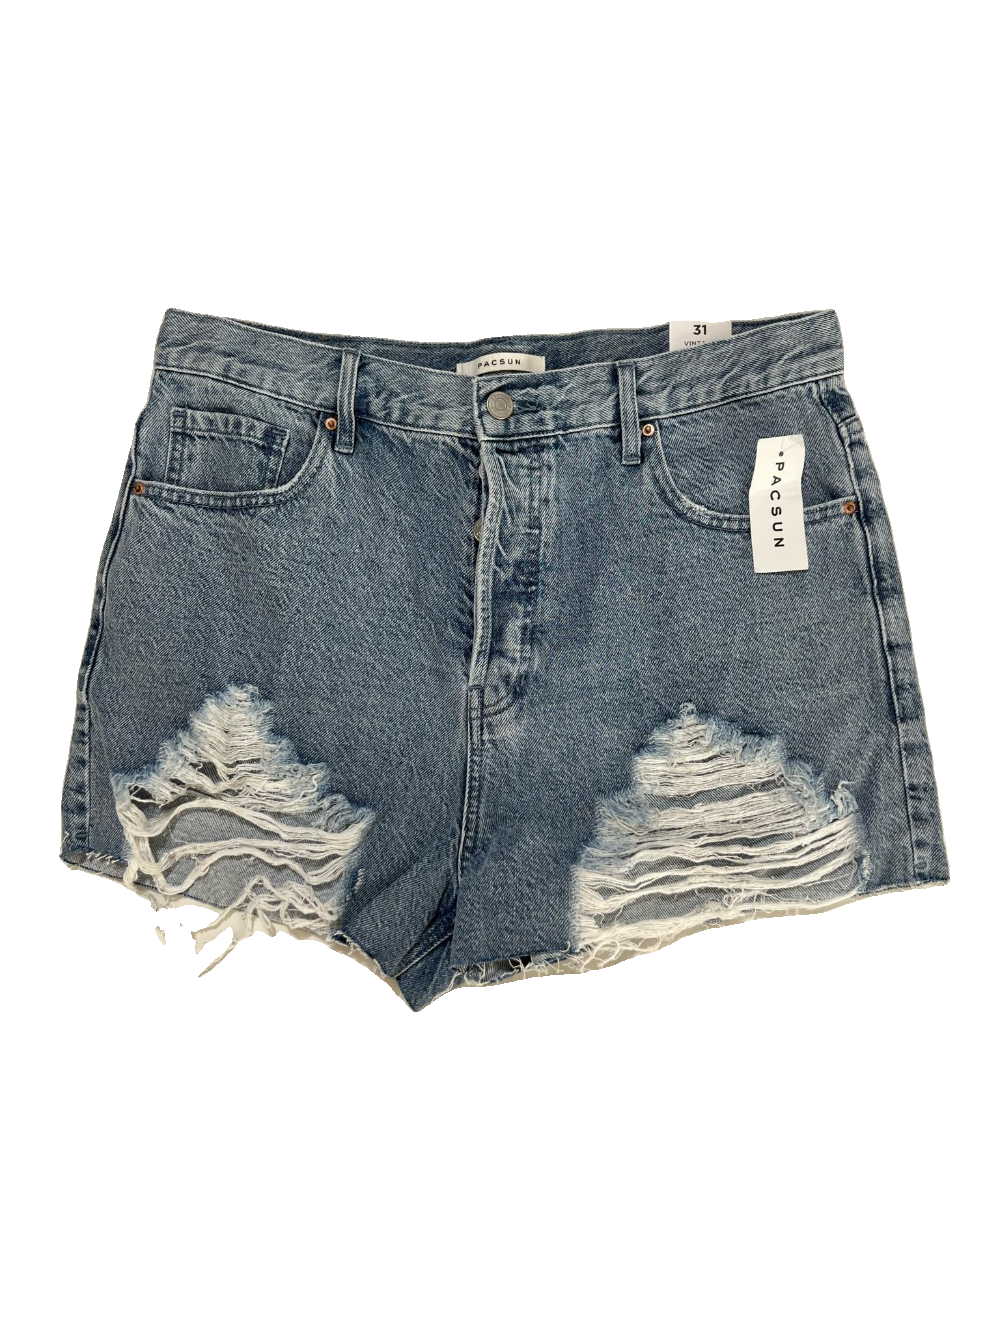 Pascun- Light Blue Denim Shorts NEW WITH TAGS